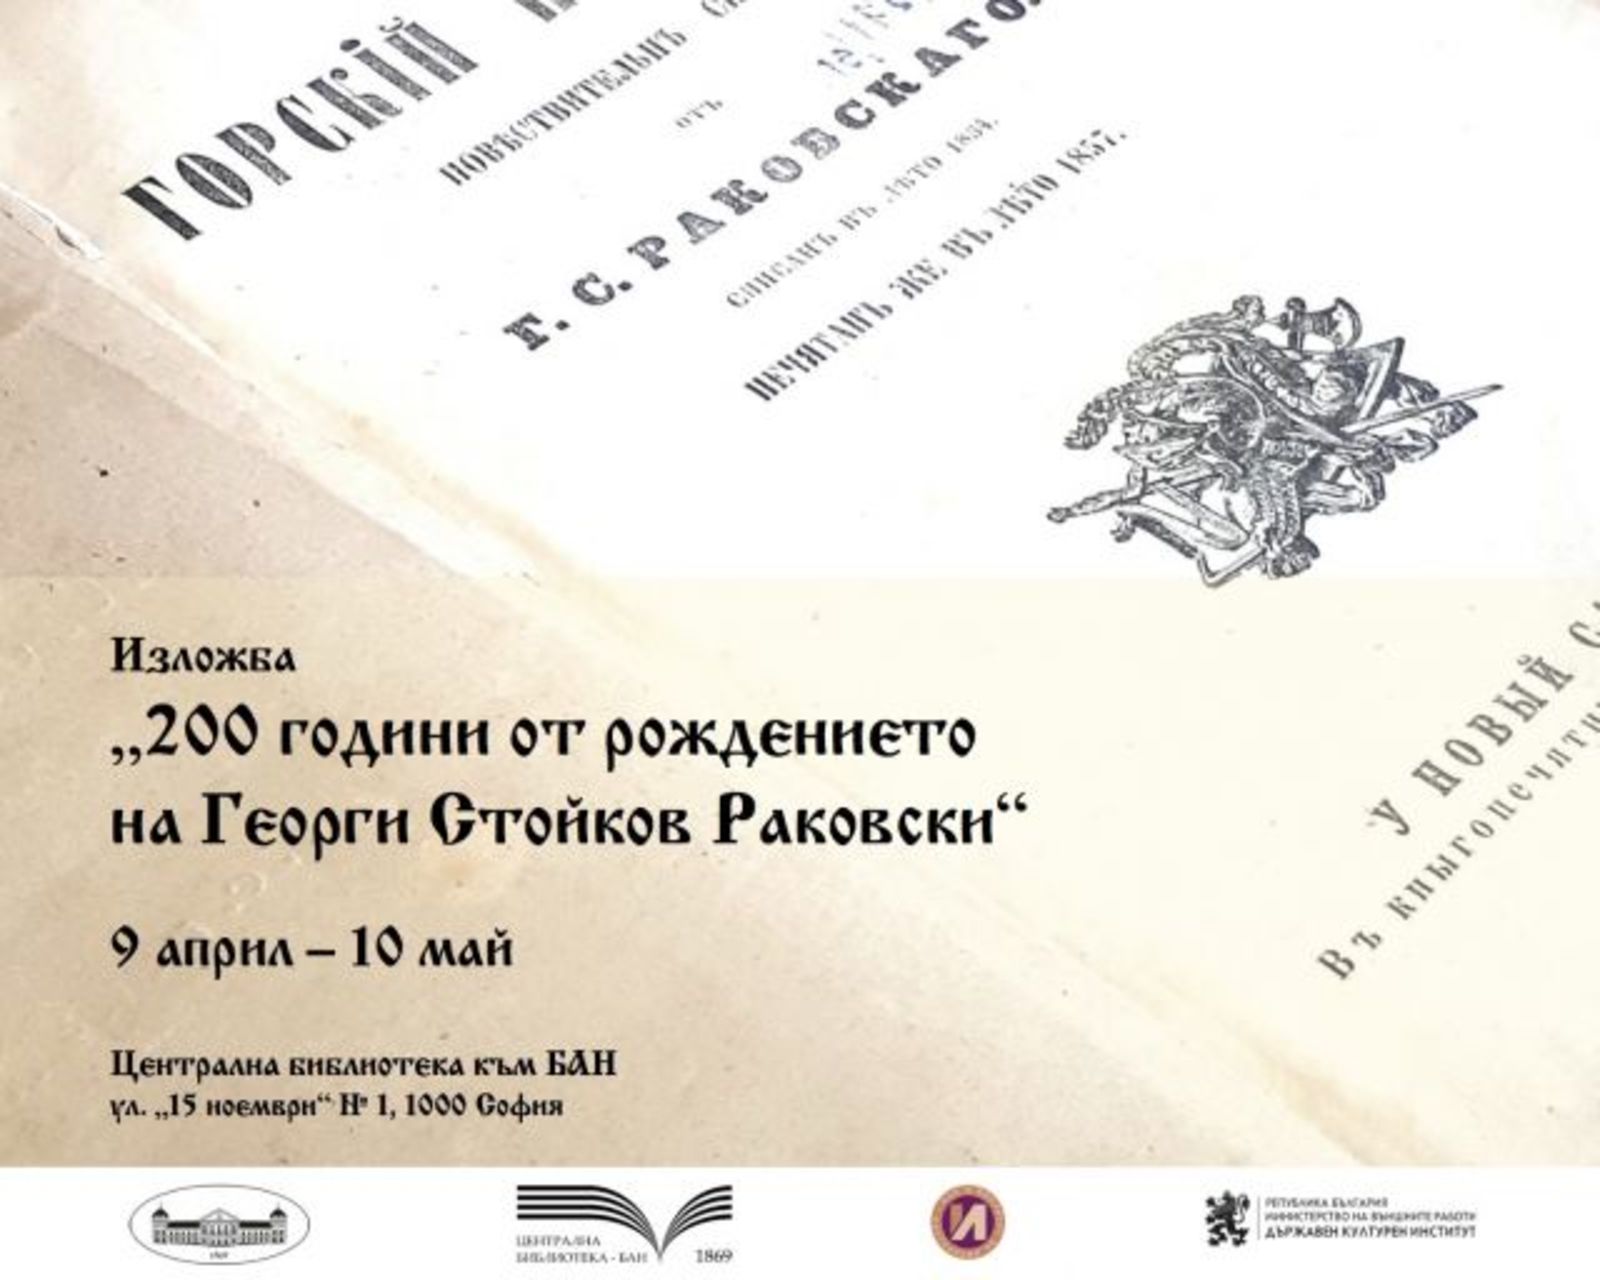 Event on the Occasion of the 200th Anniversary of the Birth of Georgi Stoykov Rakovski in Cooperation with the State Institute for Culture